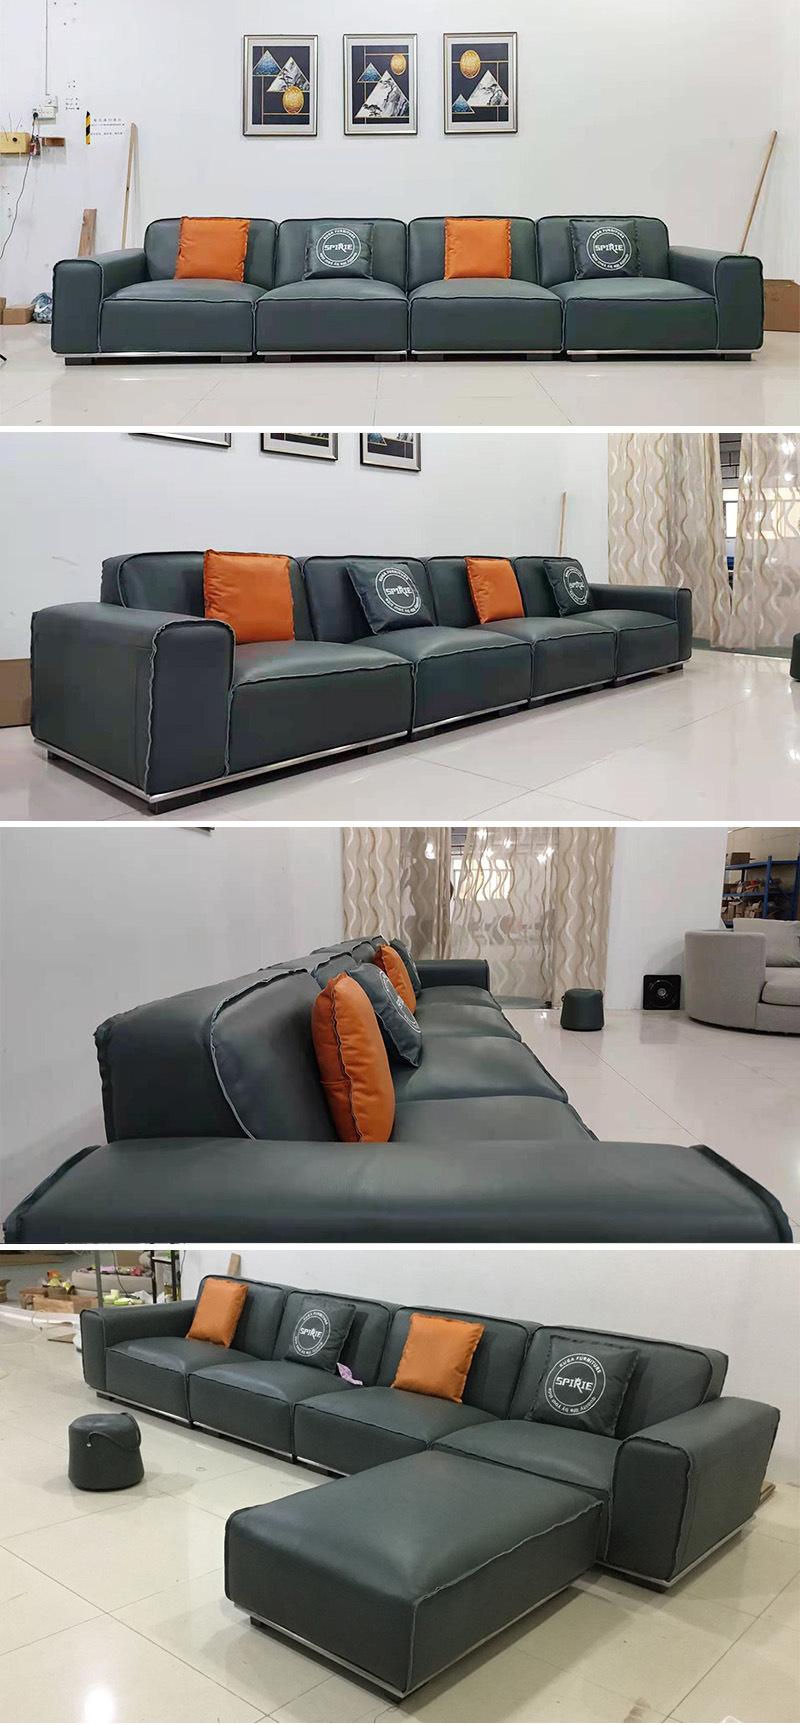 Genuine Leather Seating Modern Leisure Couch Italian Minimalism Sofa Set for Living Room Furniture